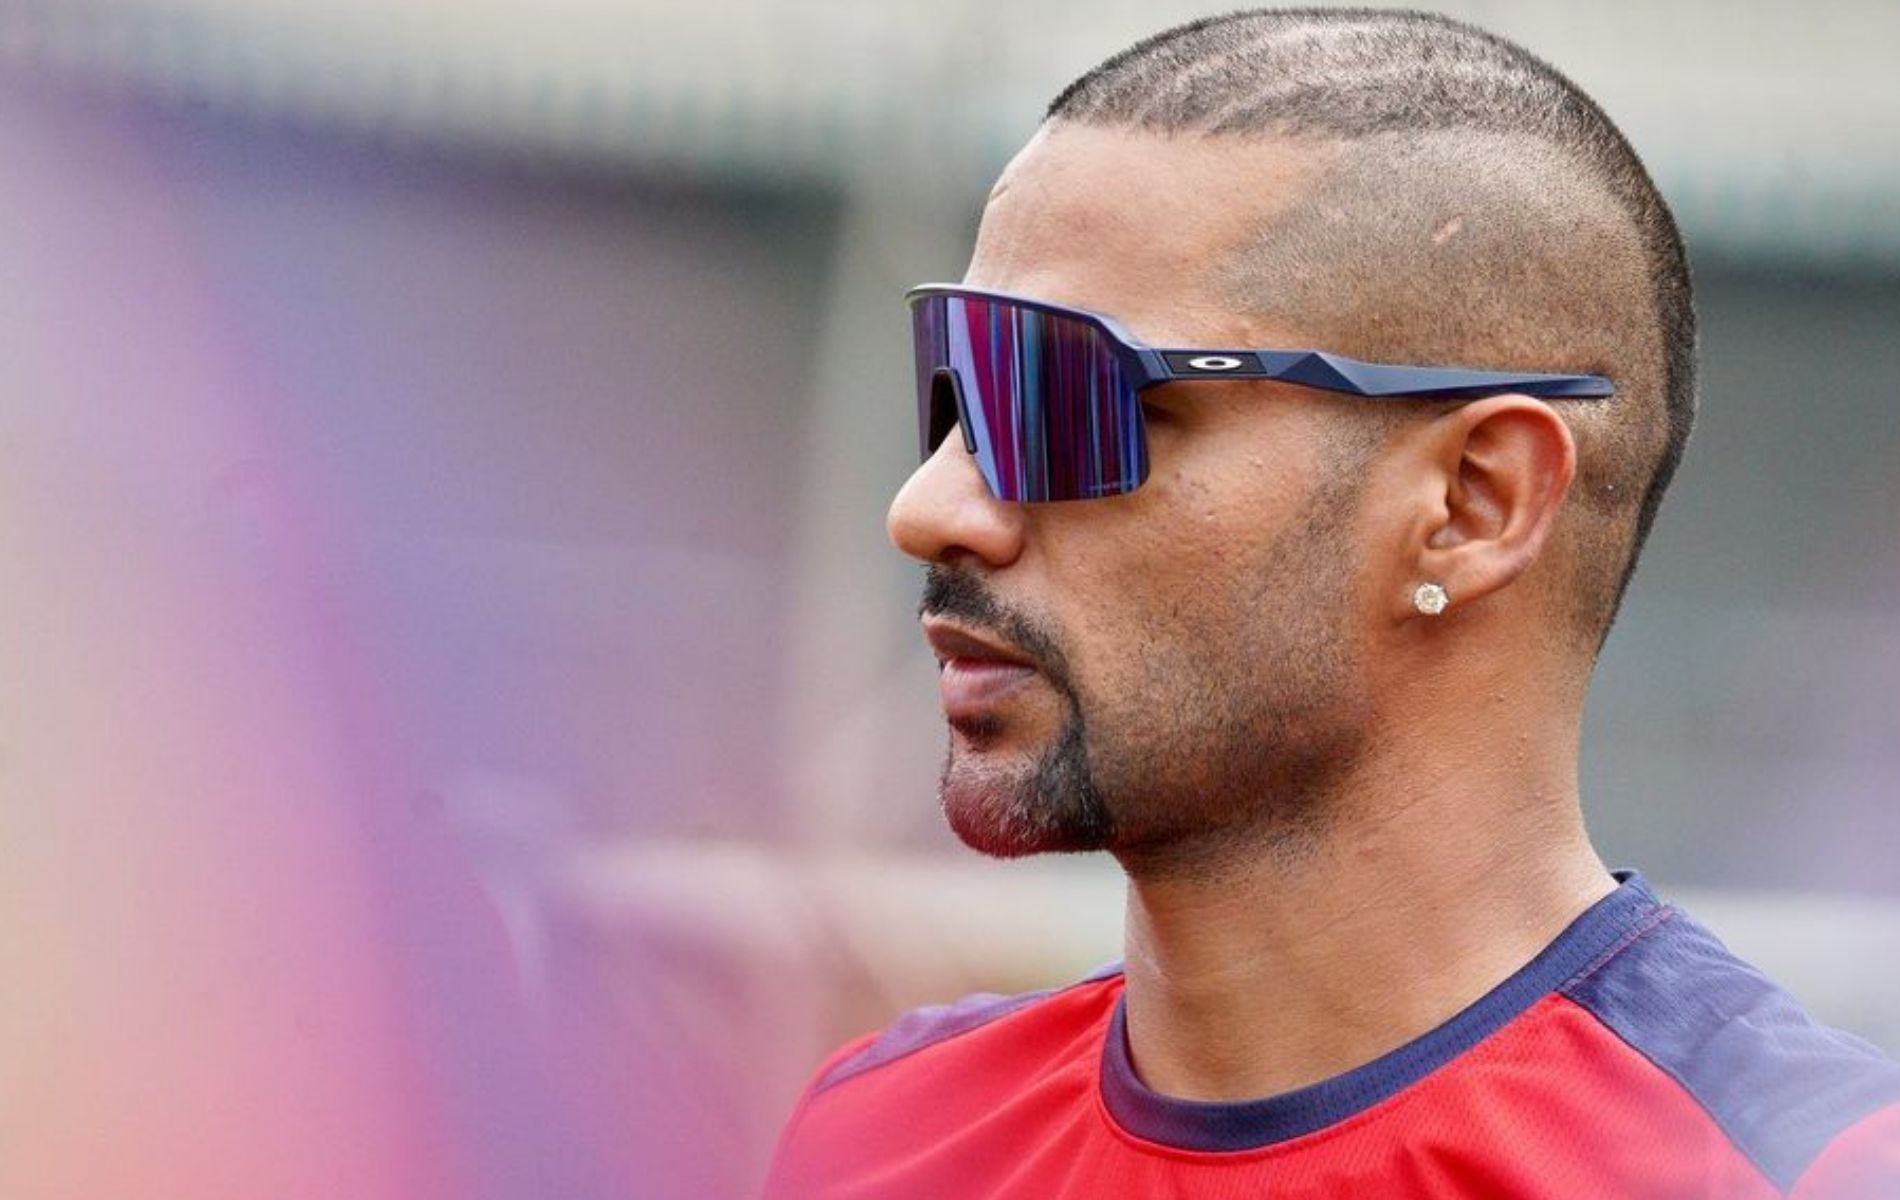 Shikhar Dhawan was signed by PBKS for ₹8.25 crore at the IPL 2022 auction